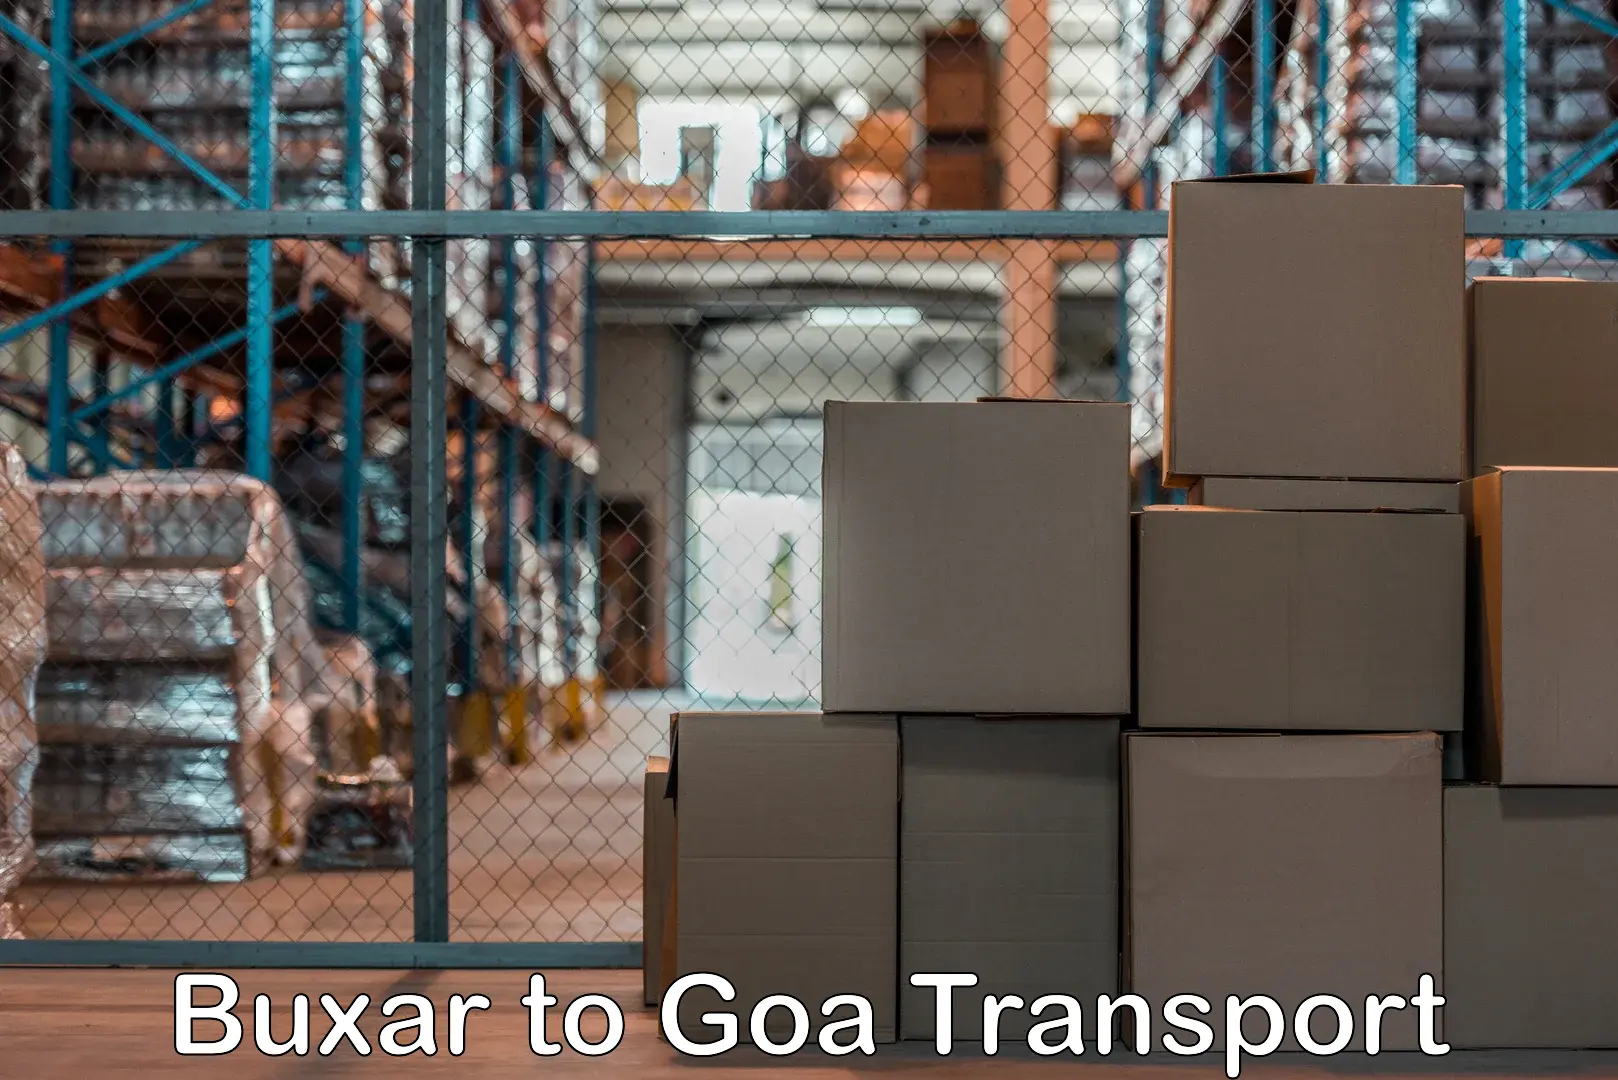 Transport in sharing Buxar to Goa